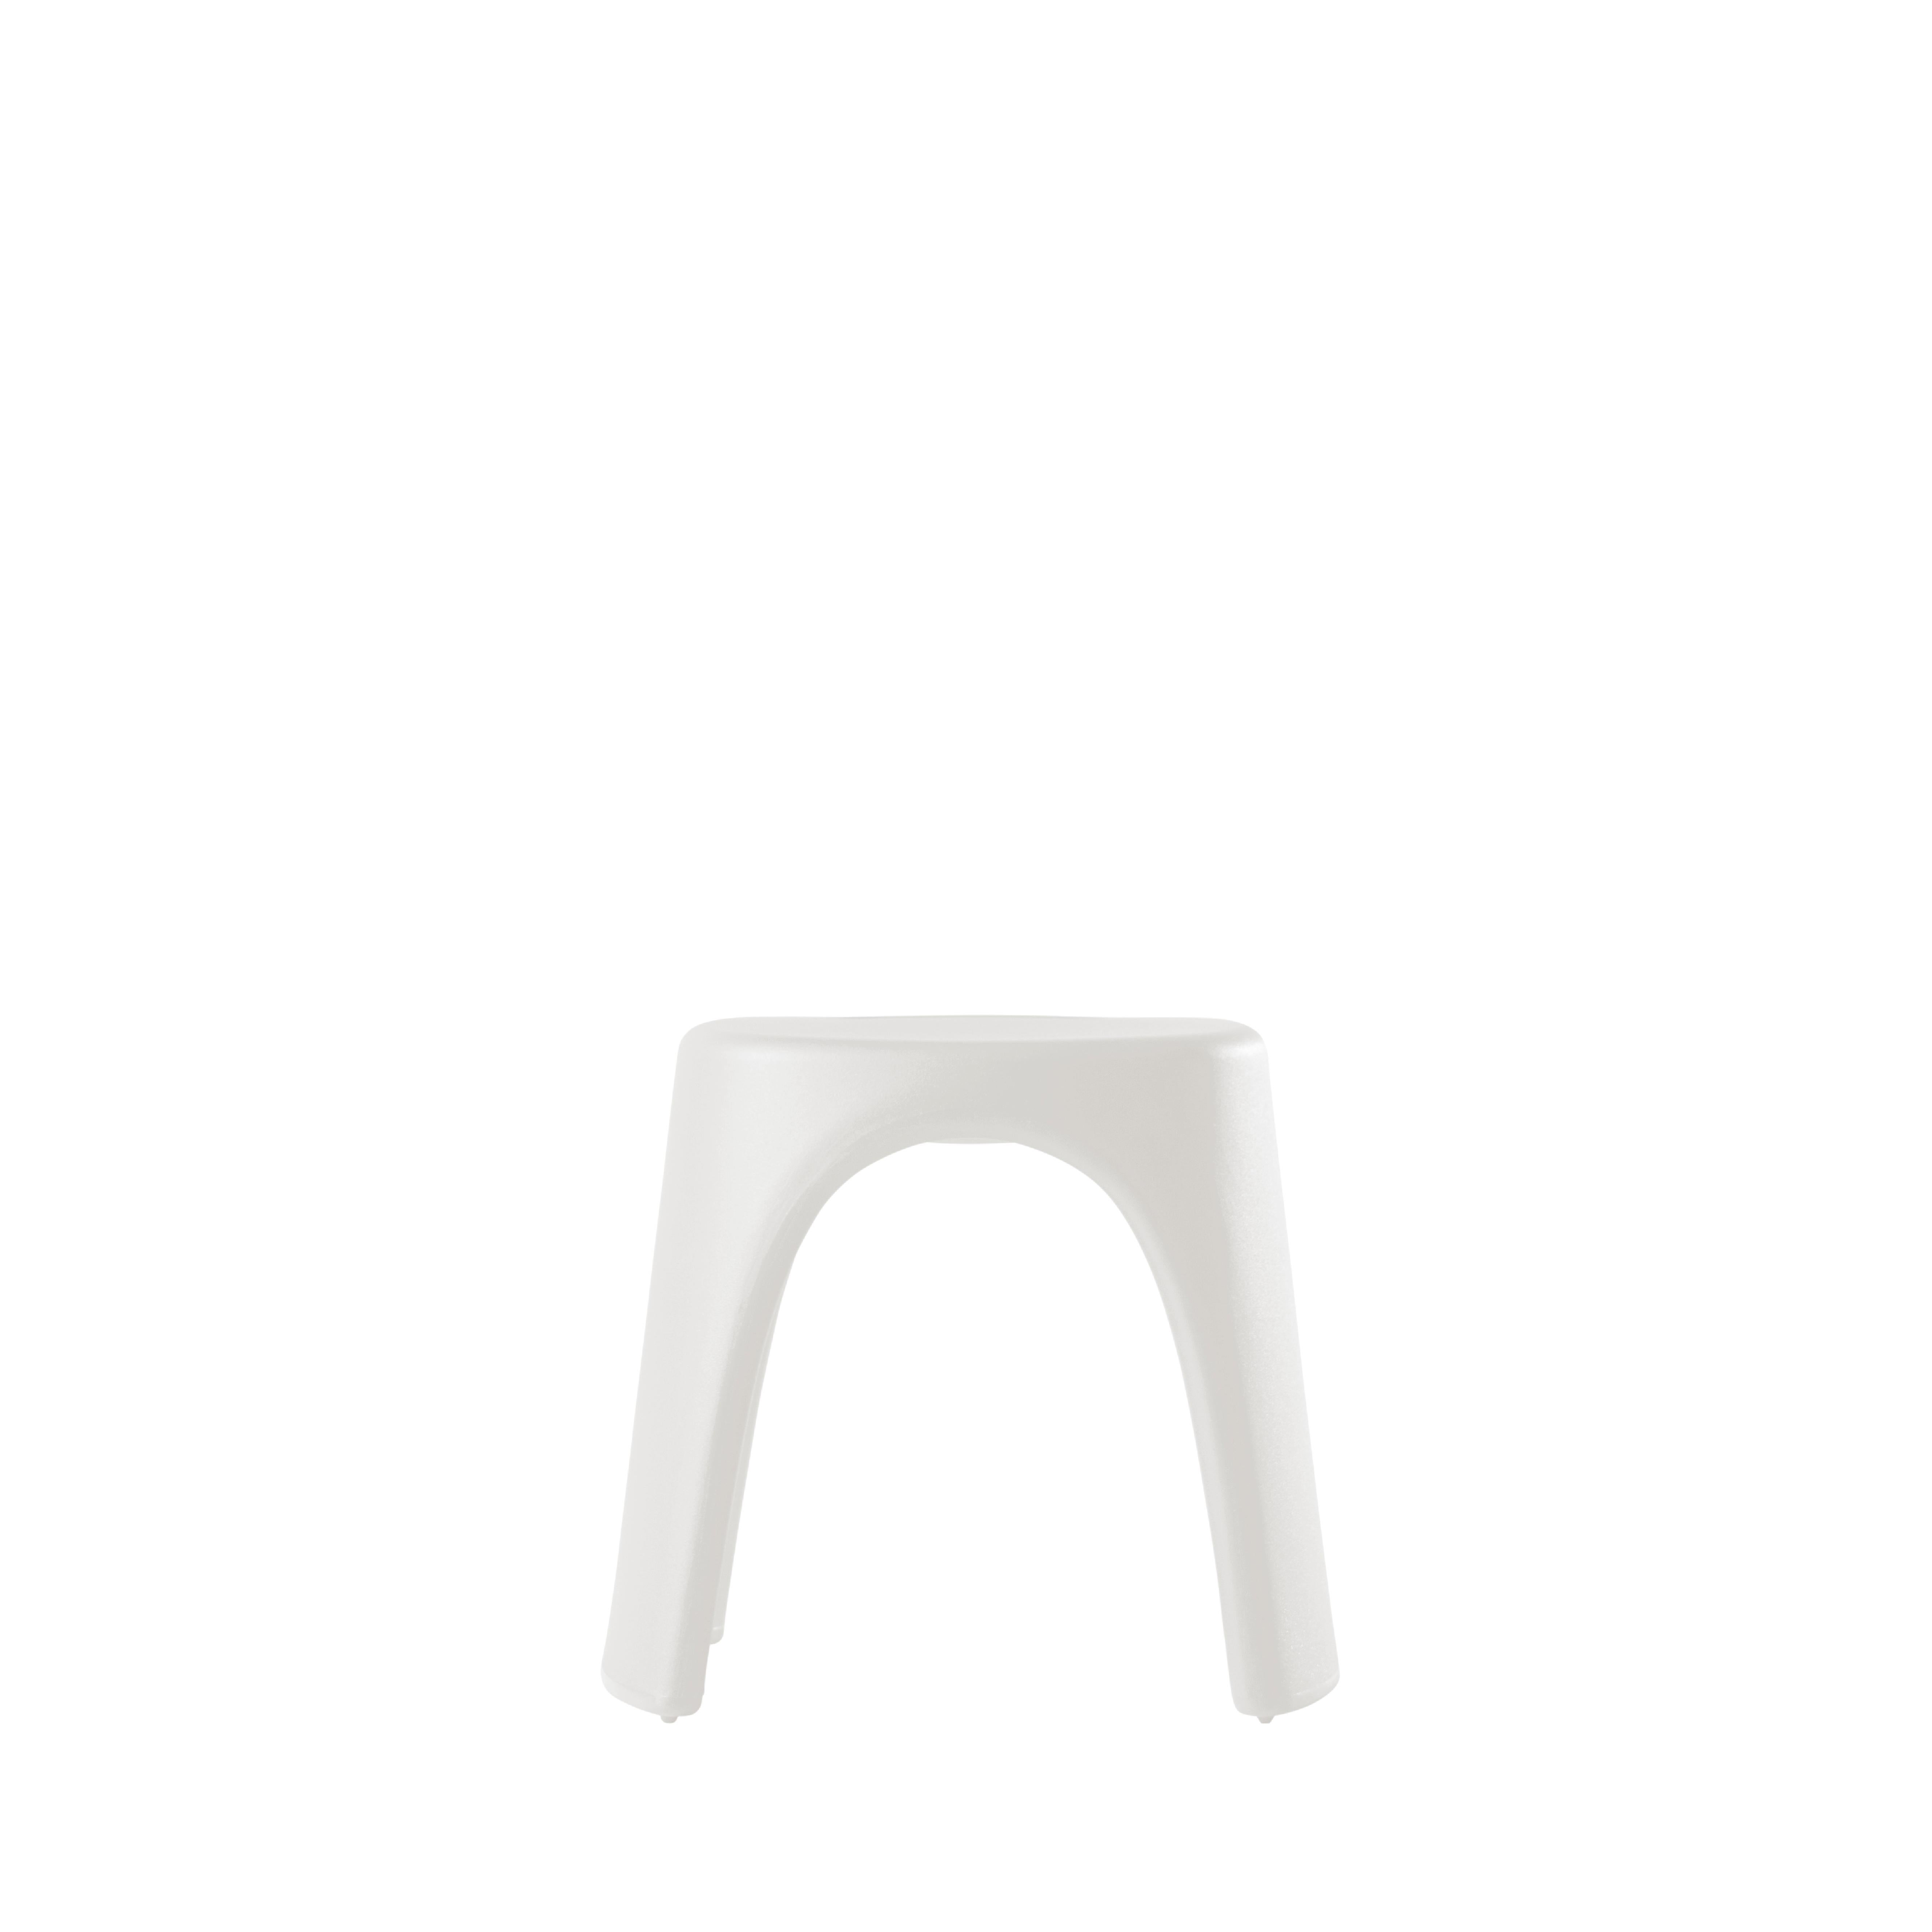 Jet Black Amélie Sgabello Stool by Italo Pertichini
Dimensions: D 40 x W 46 x H 43 cm.
Materials: Polyethylene.
Weight: 4 kg.

Available in a standard version and lacquered version. Prices may vary. Available in different color options. This product